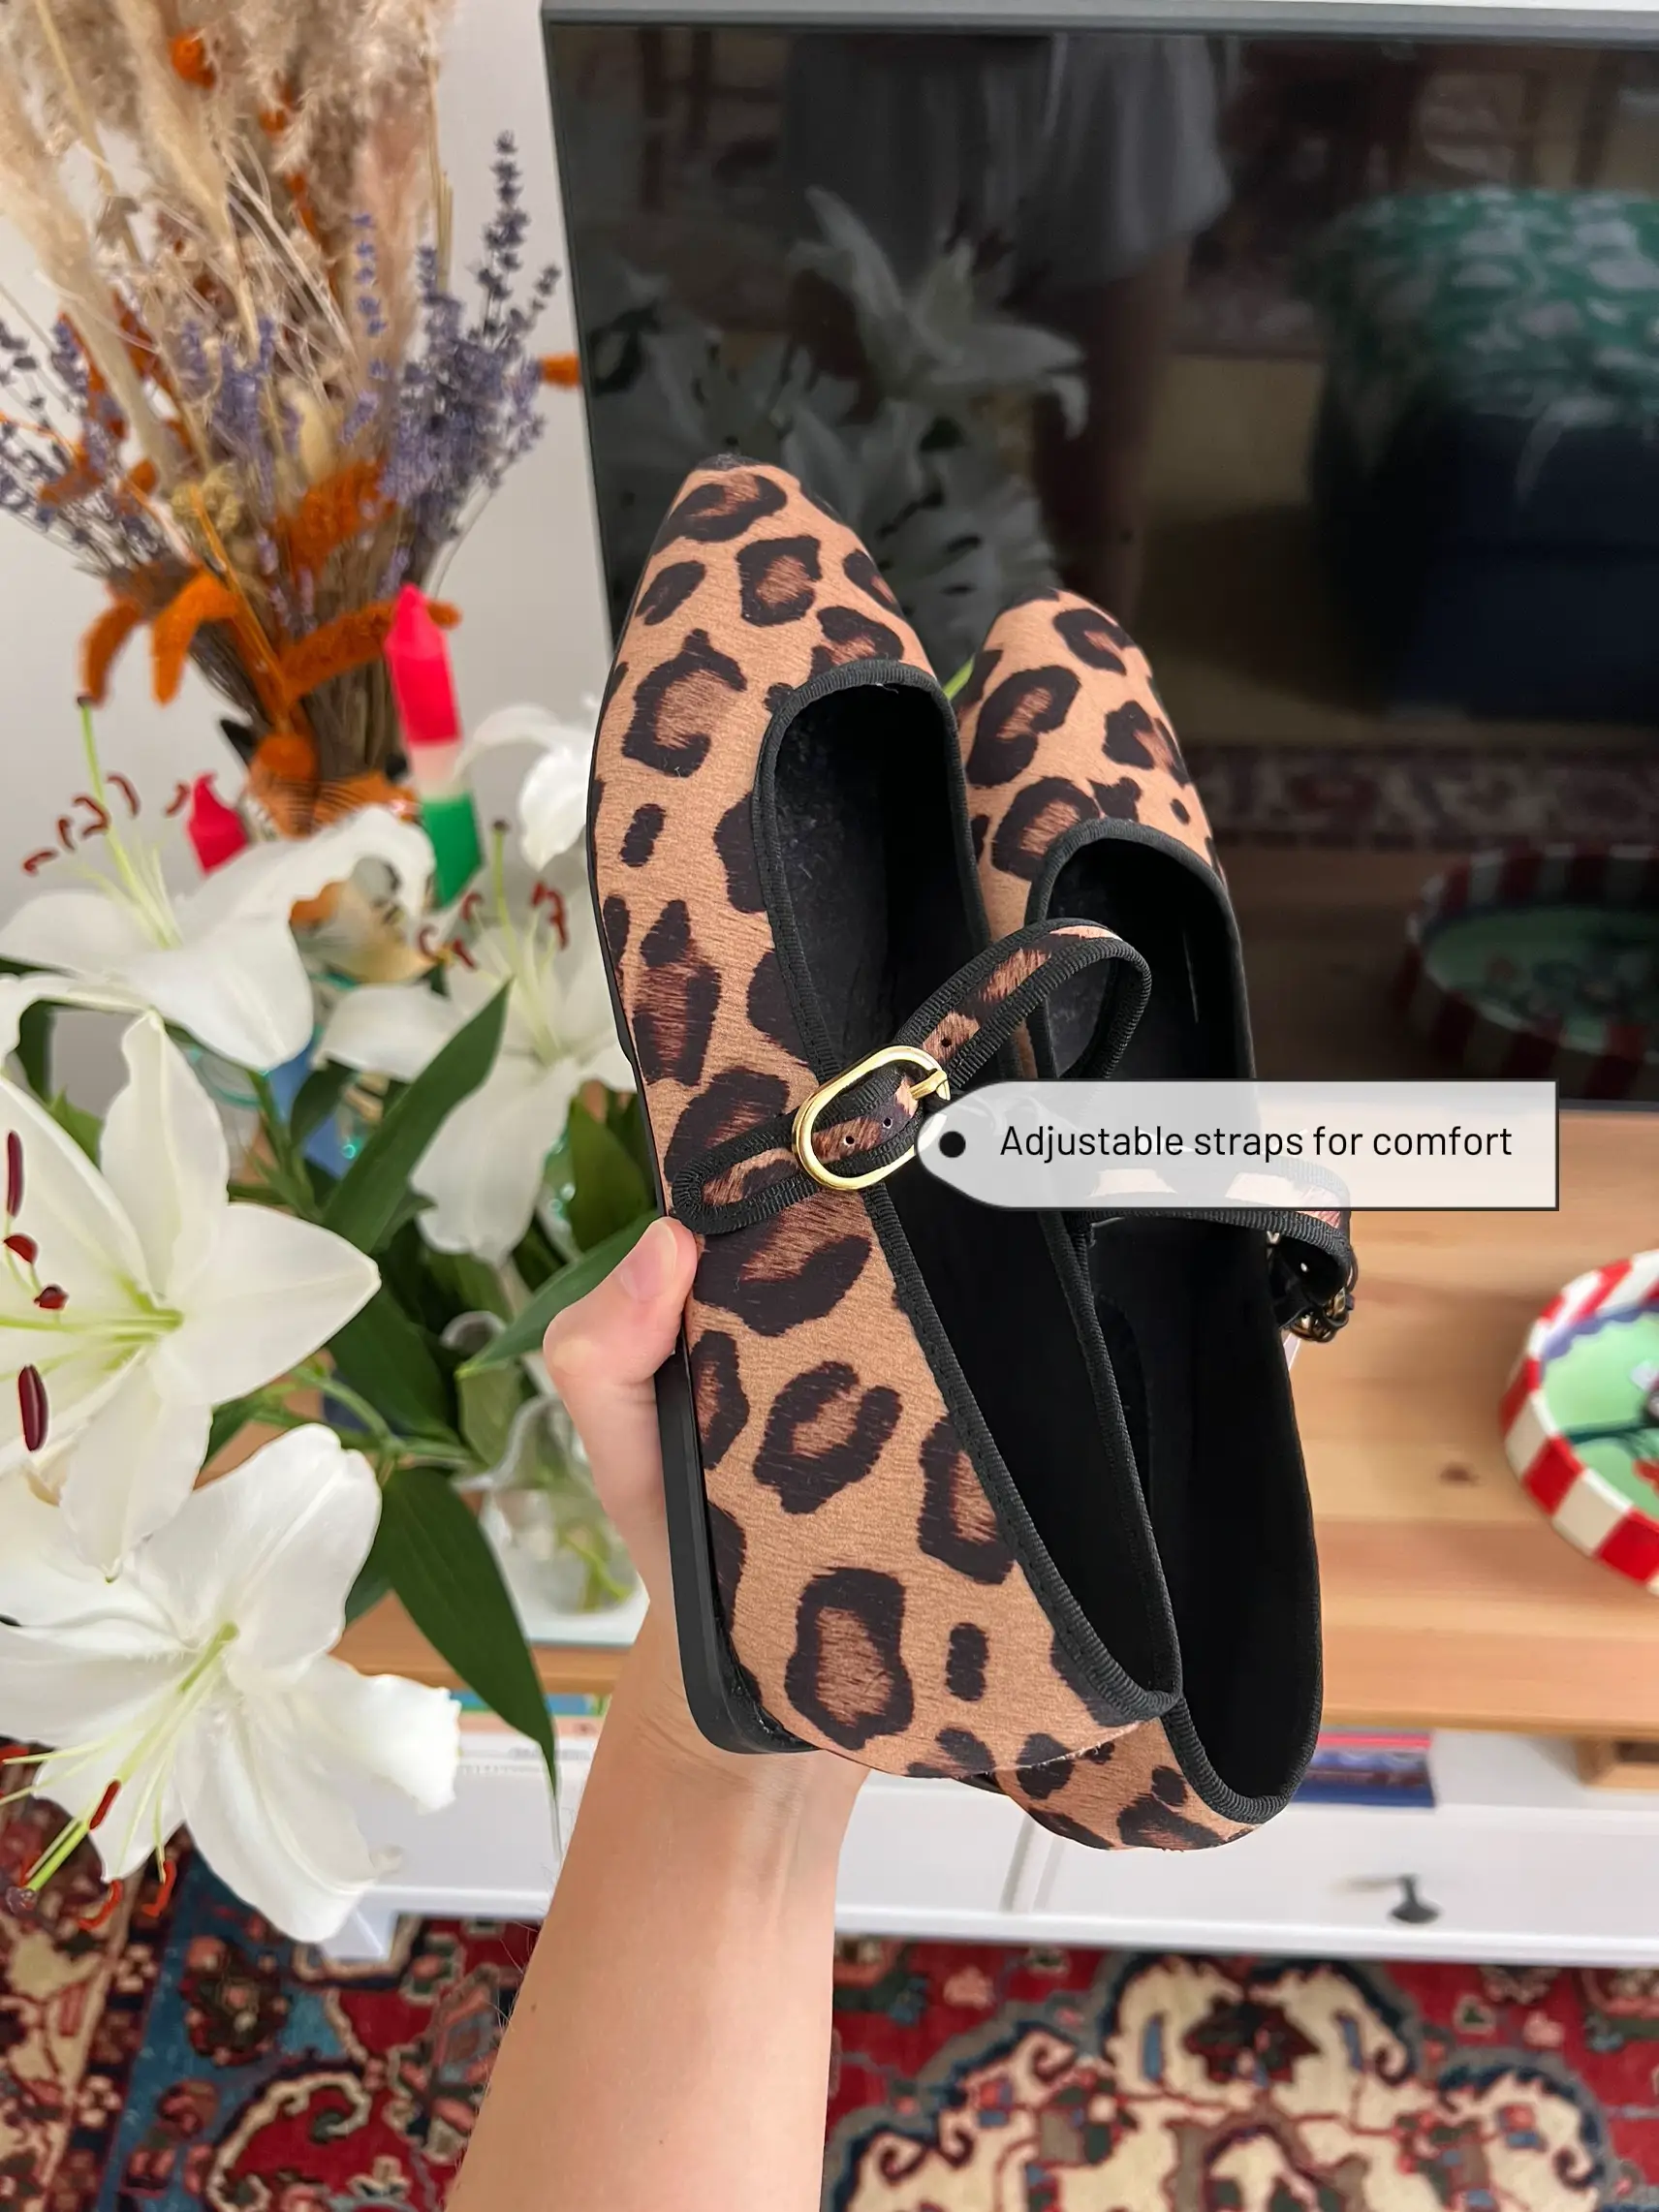 Zara ballet flat review! 🐆🩰, Gallery posted by ElinorCharlotte